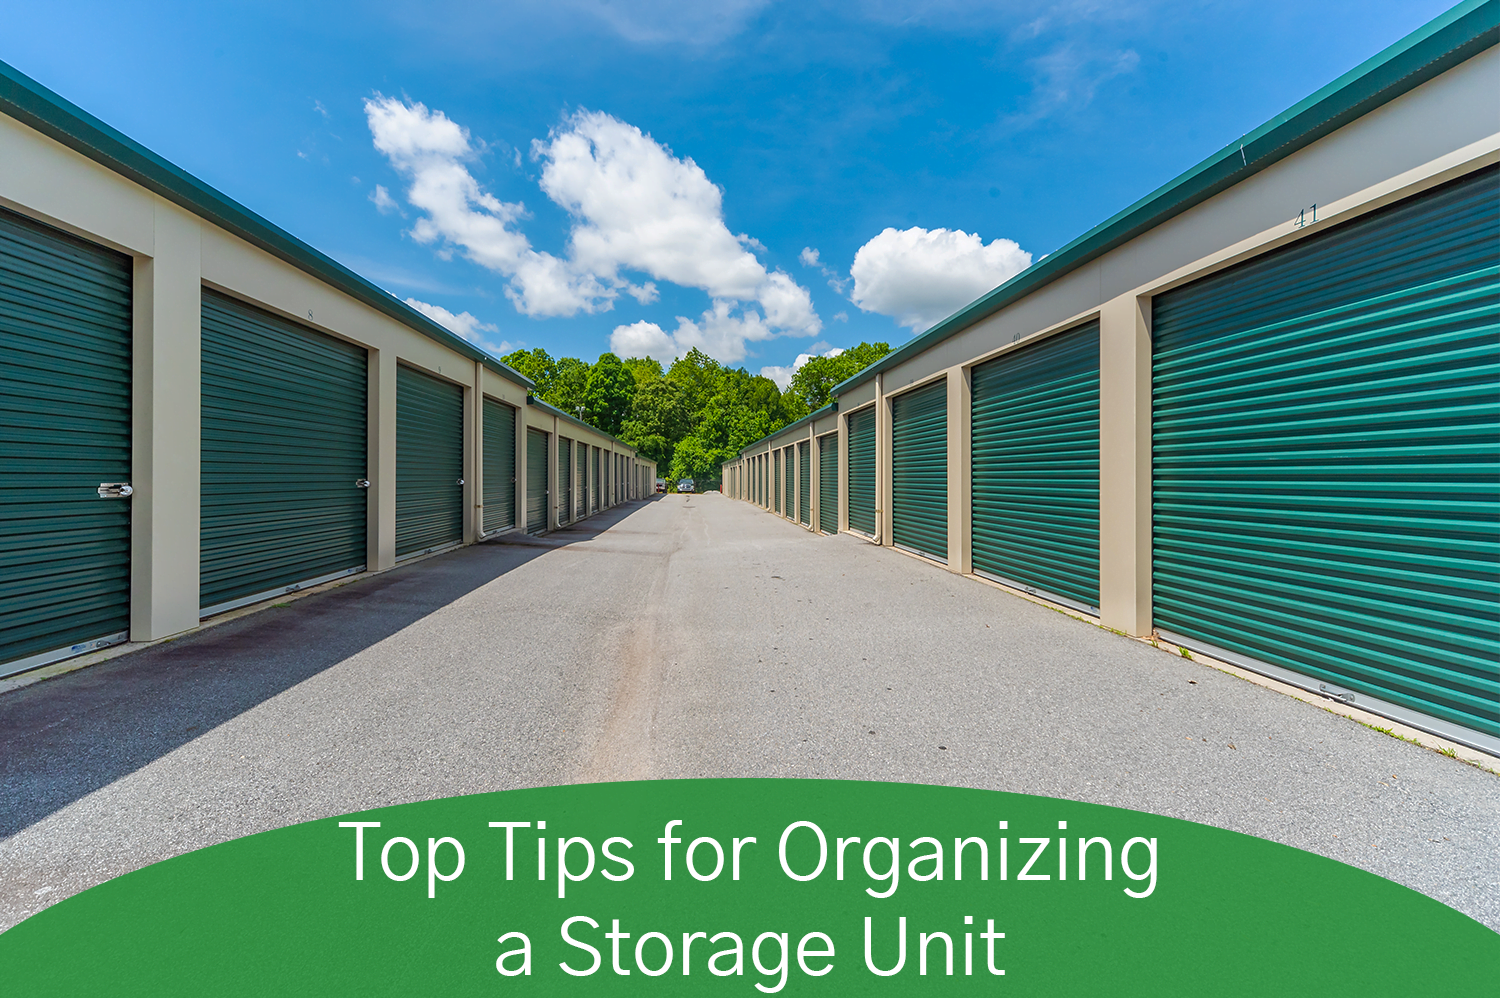 A storage unit facility row of storage units with green doors and tan walls.